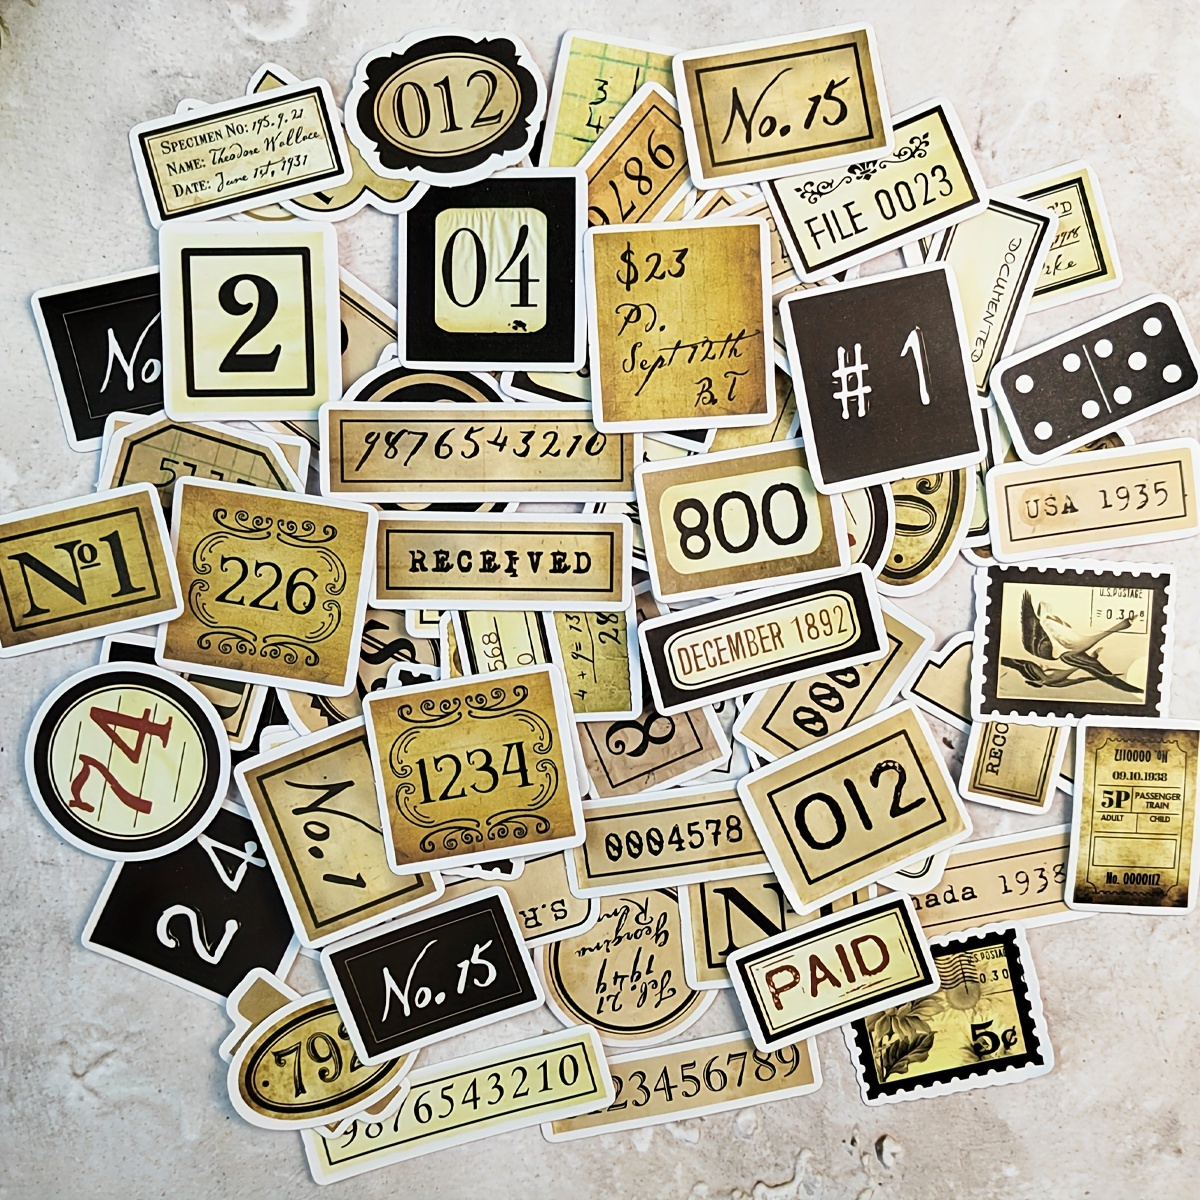 Vintage Stamp Stickers for Bullet Journals & Planners